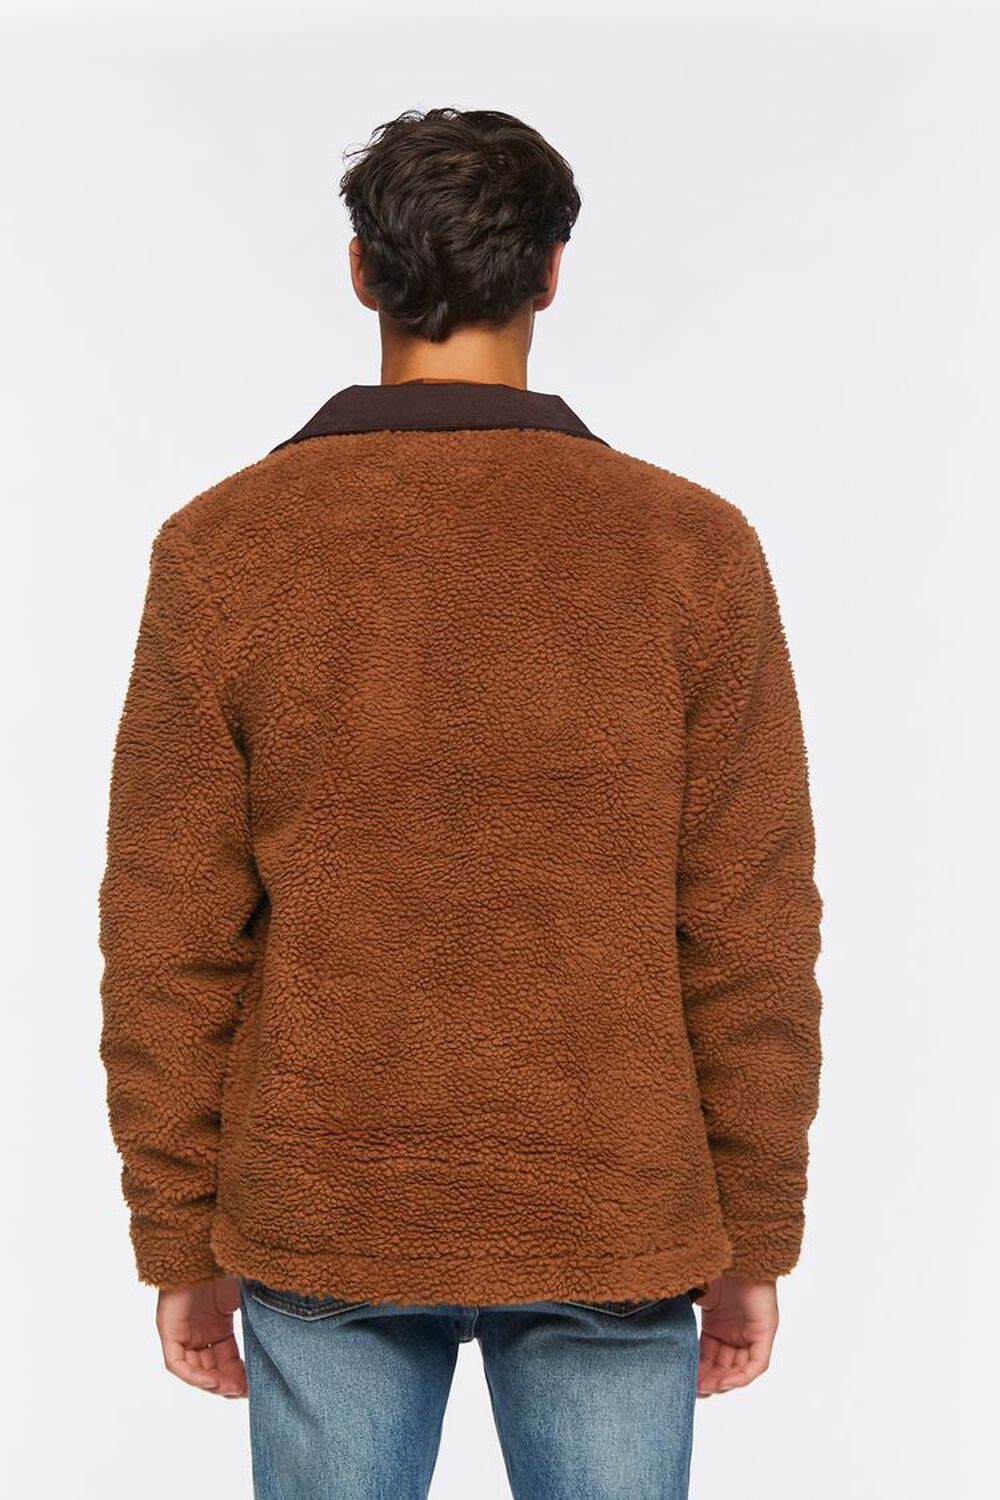 BROWN Faux Shearling Snap-Button Jacket, image 3